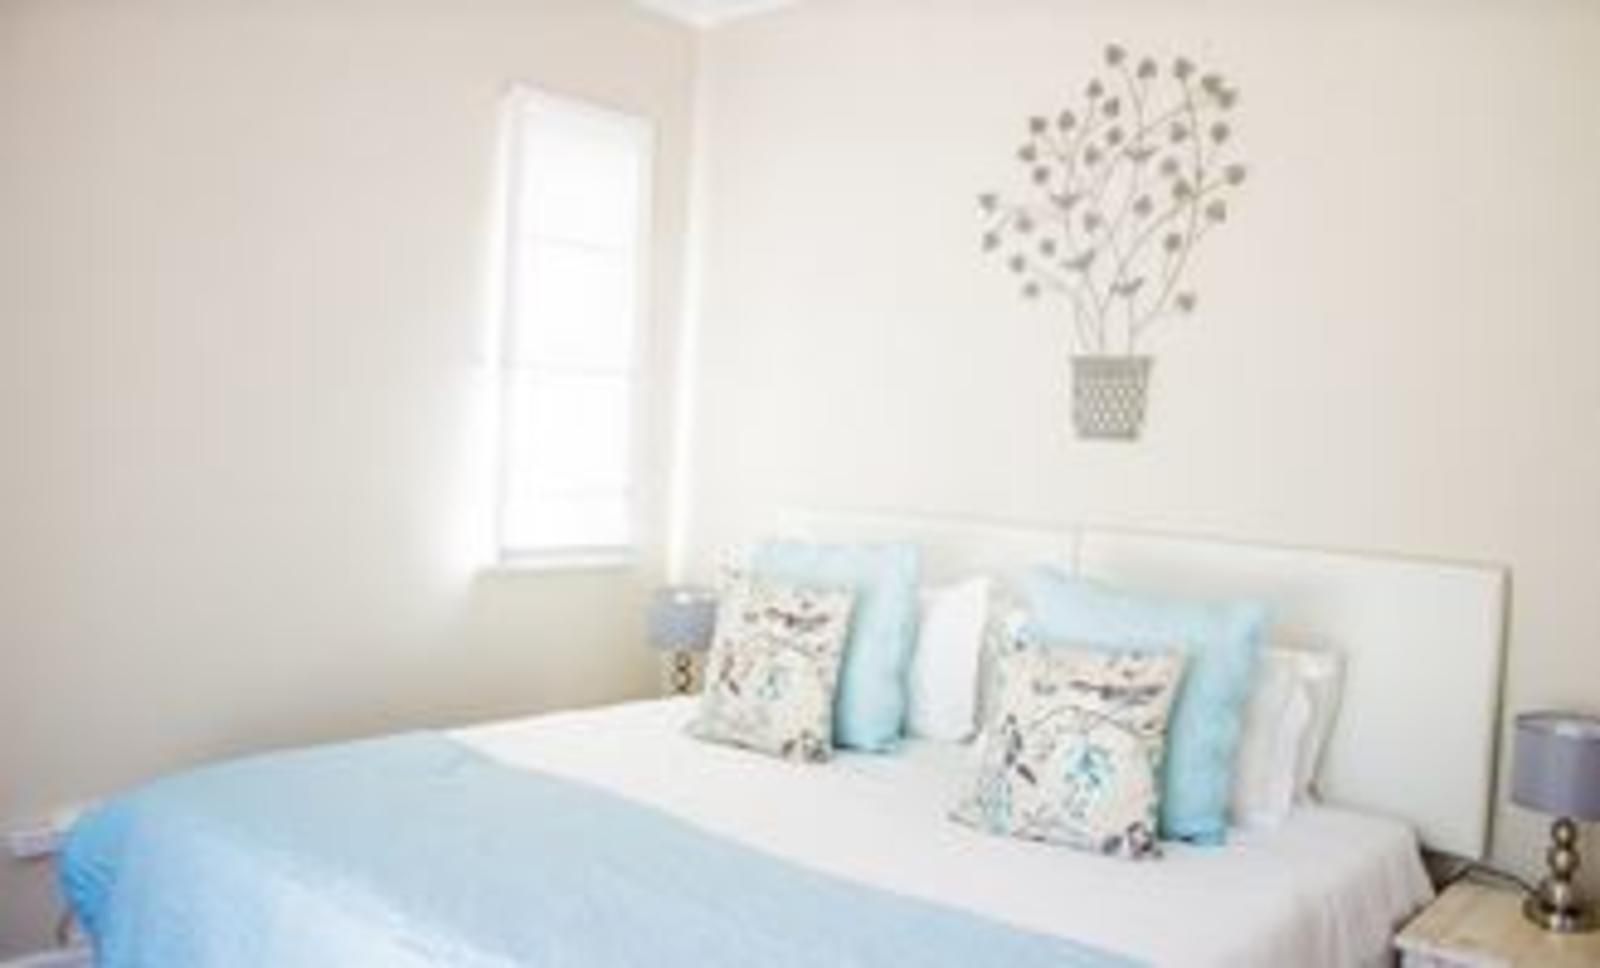 Little Rose Self Catering Charlo Port Elizabeth Eastern Cape South Africa Bright, Bedroom